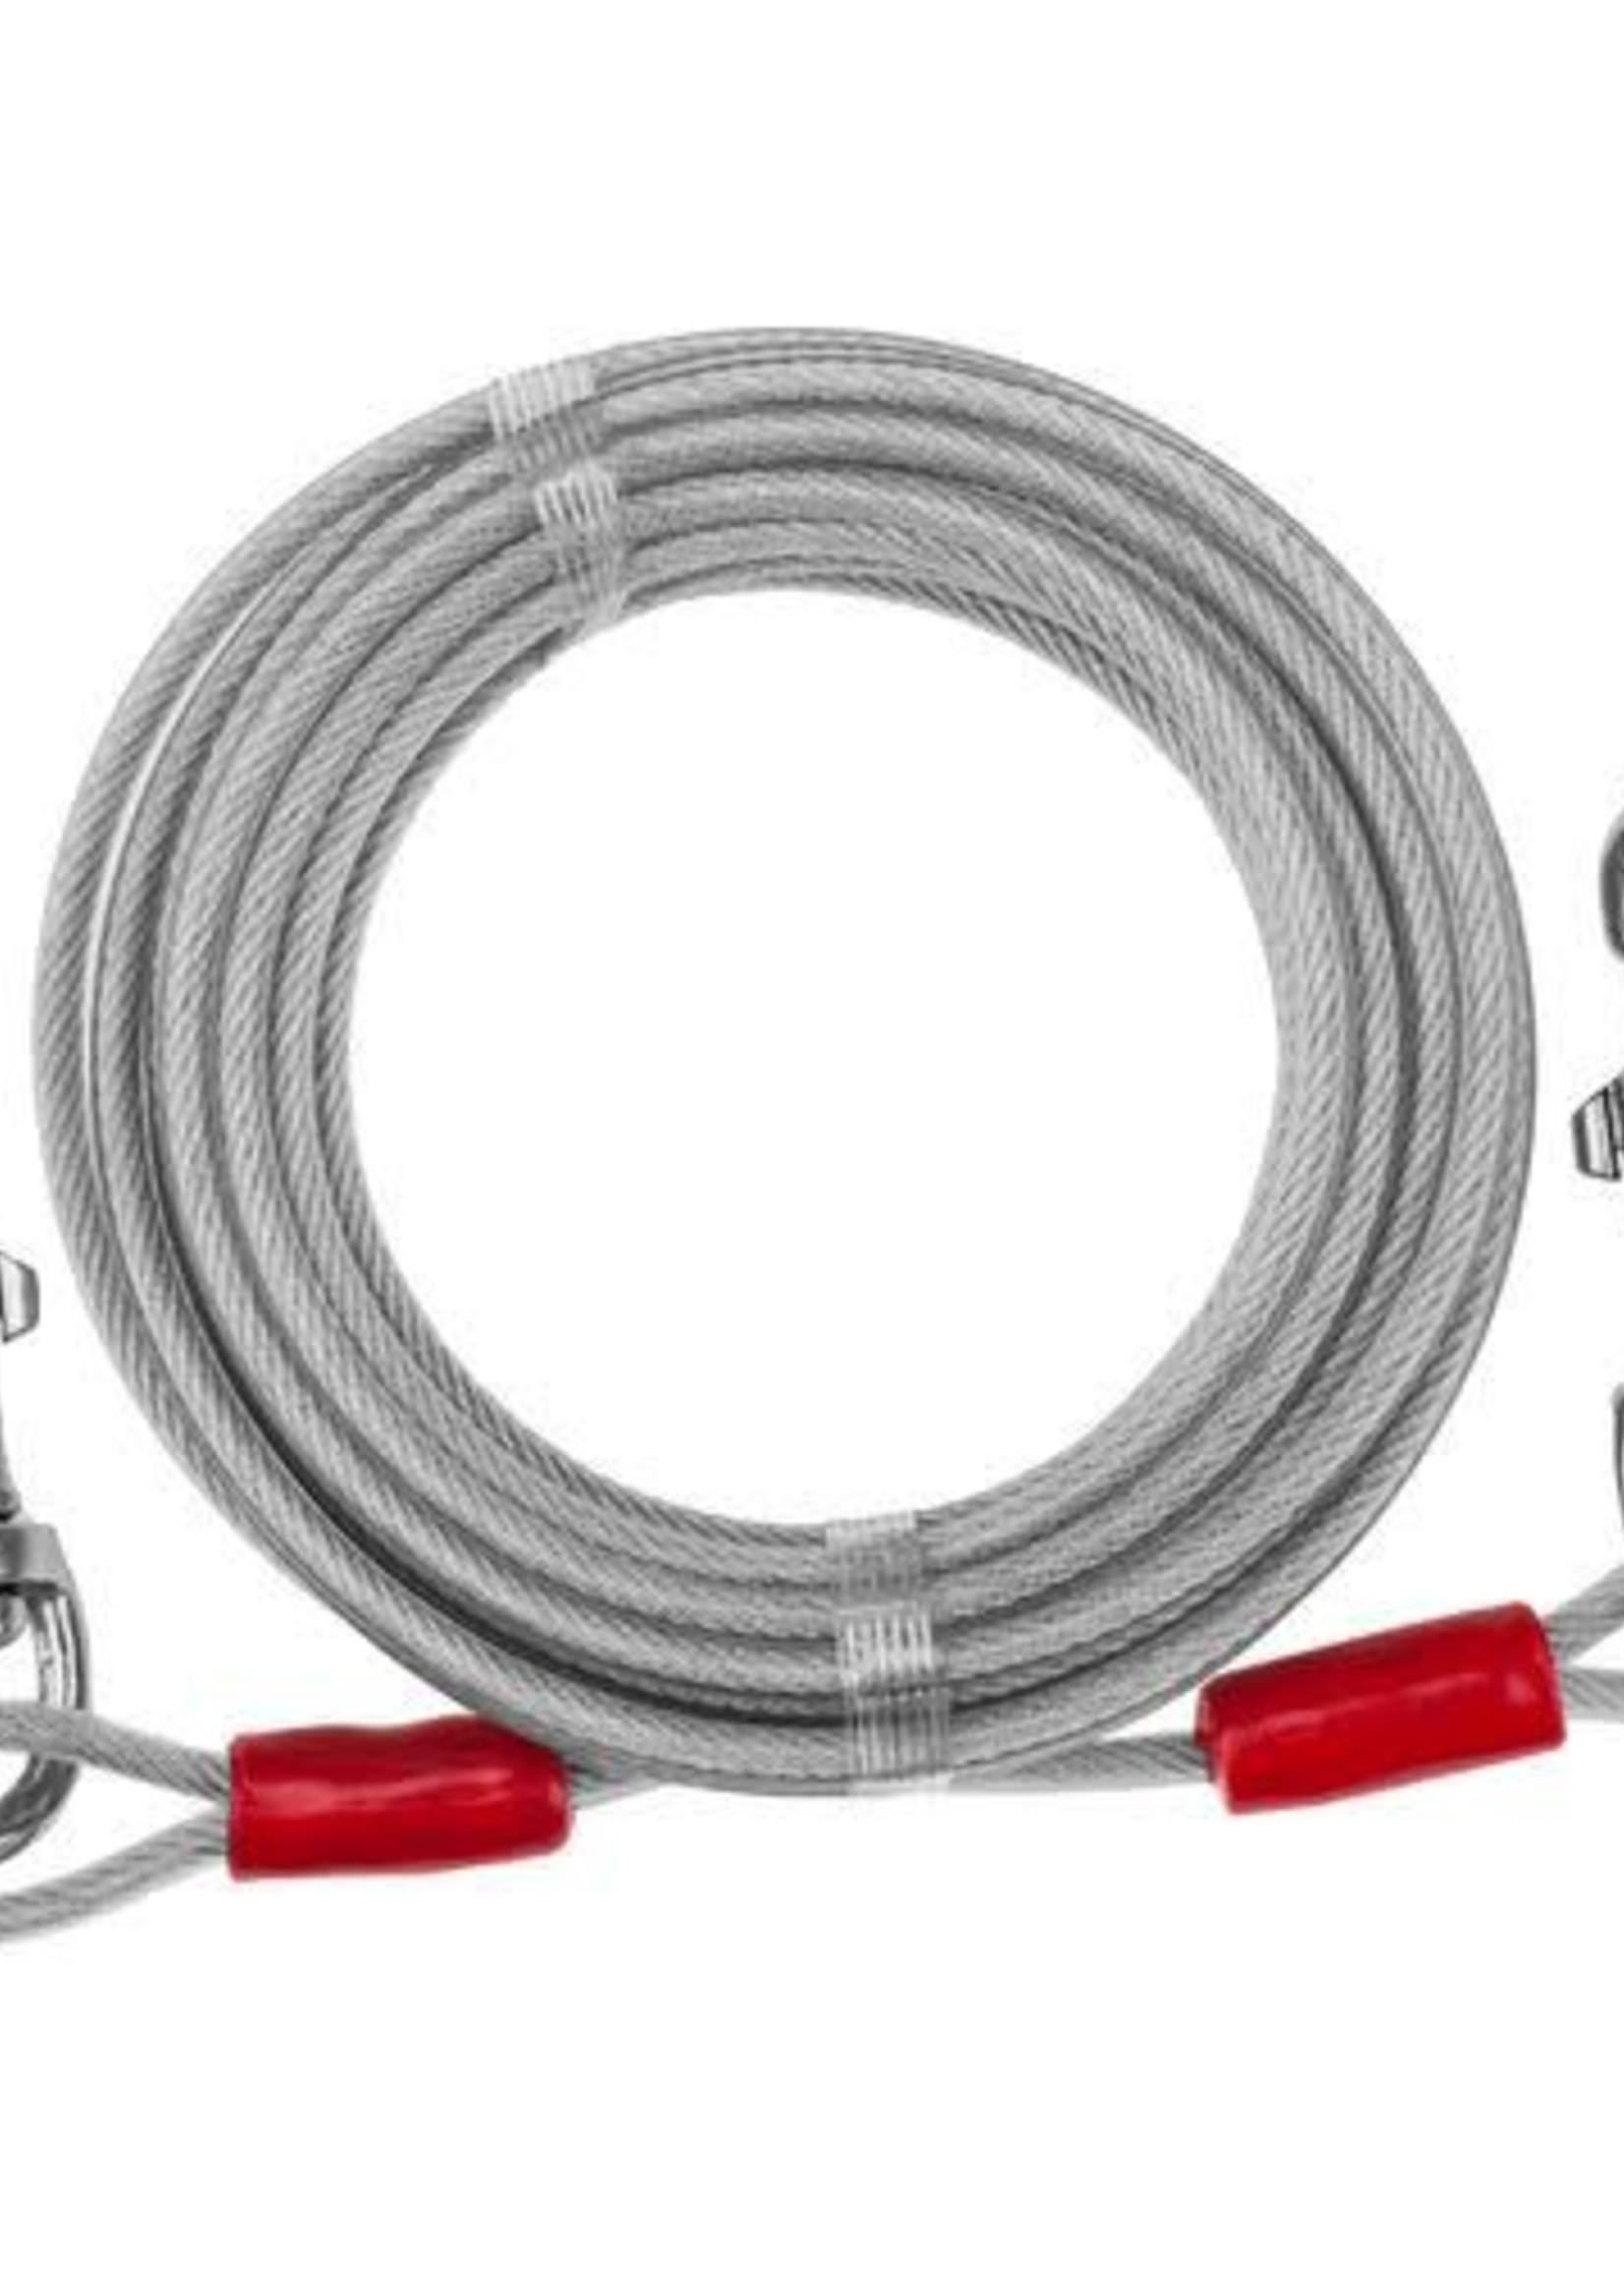 Lge Tie Out Cable 25ft Silver